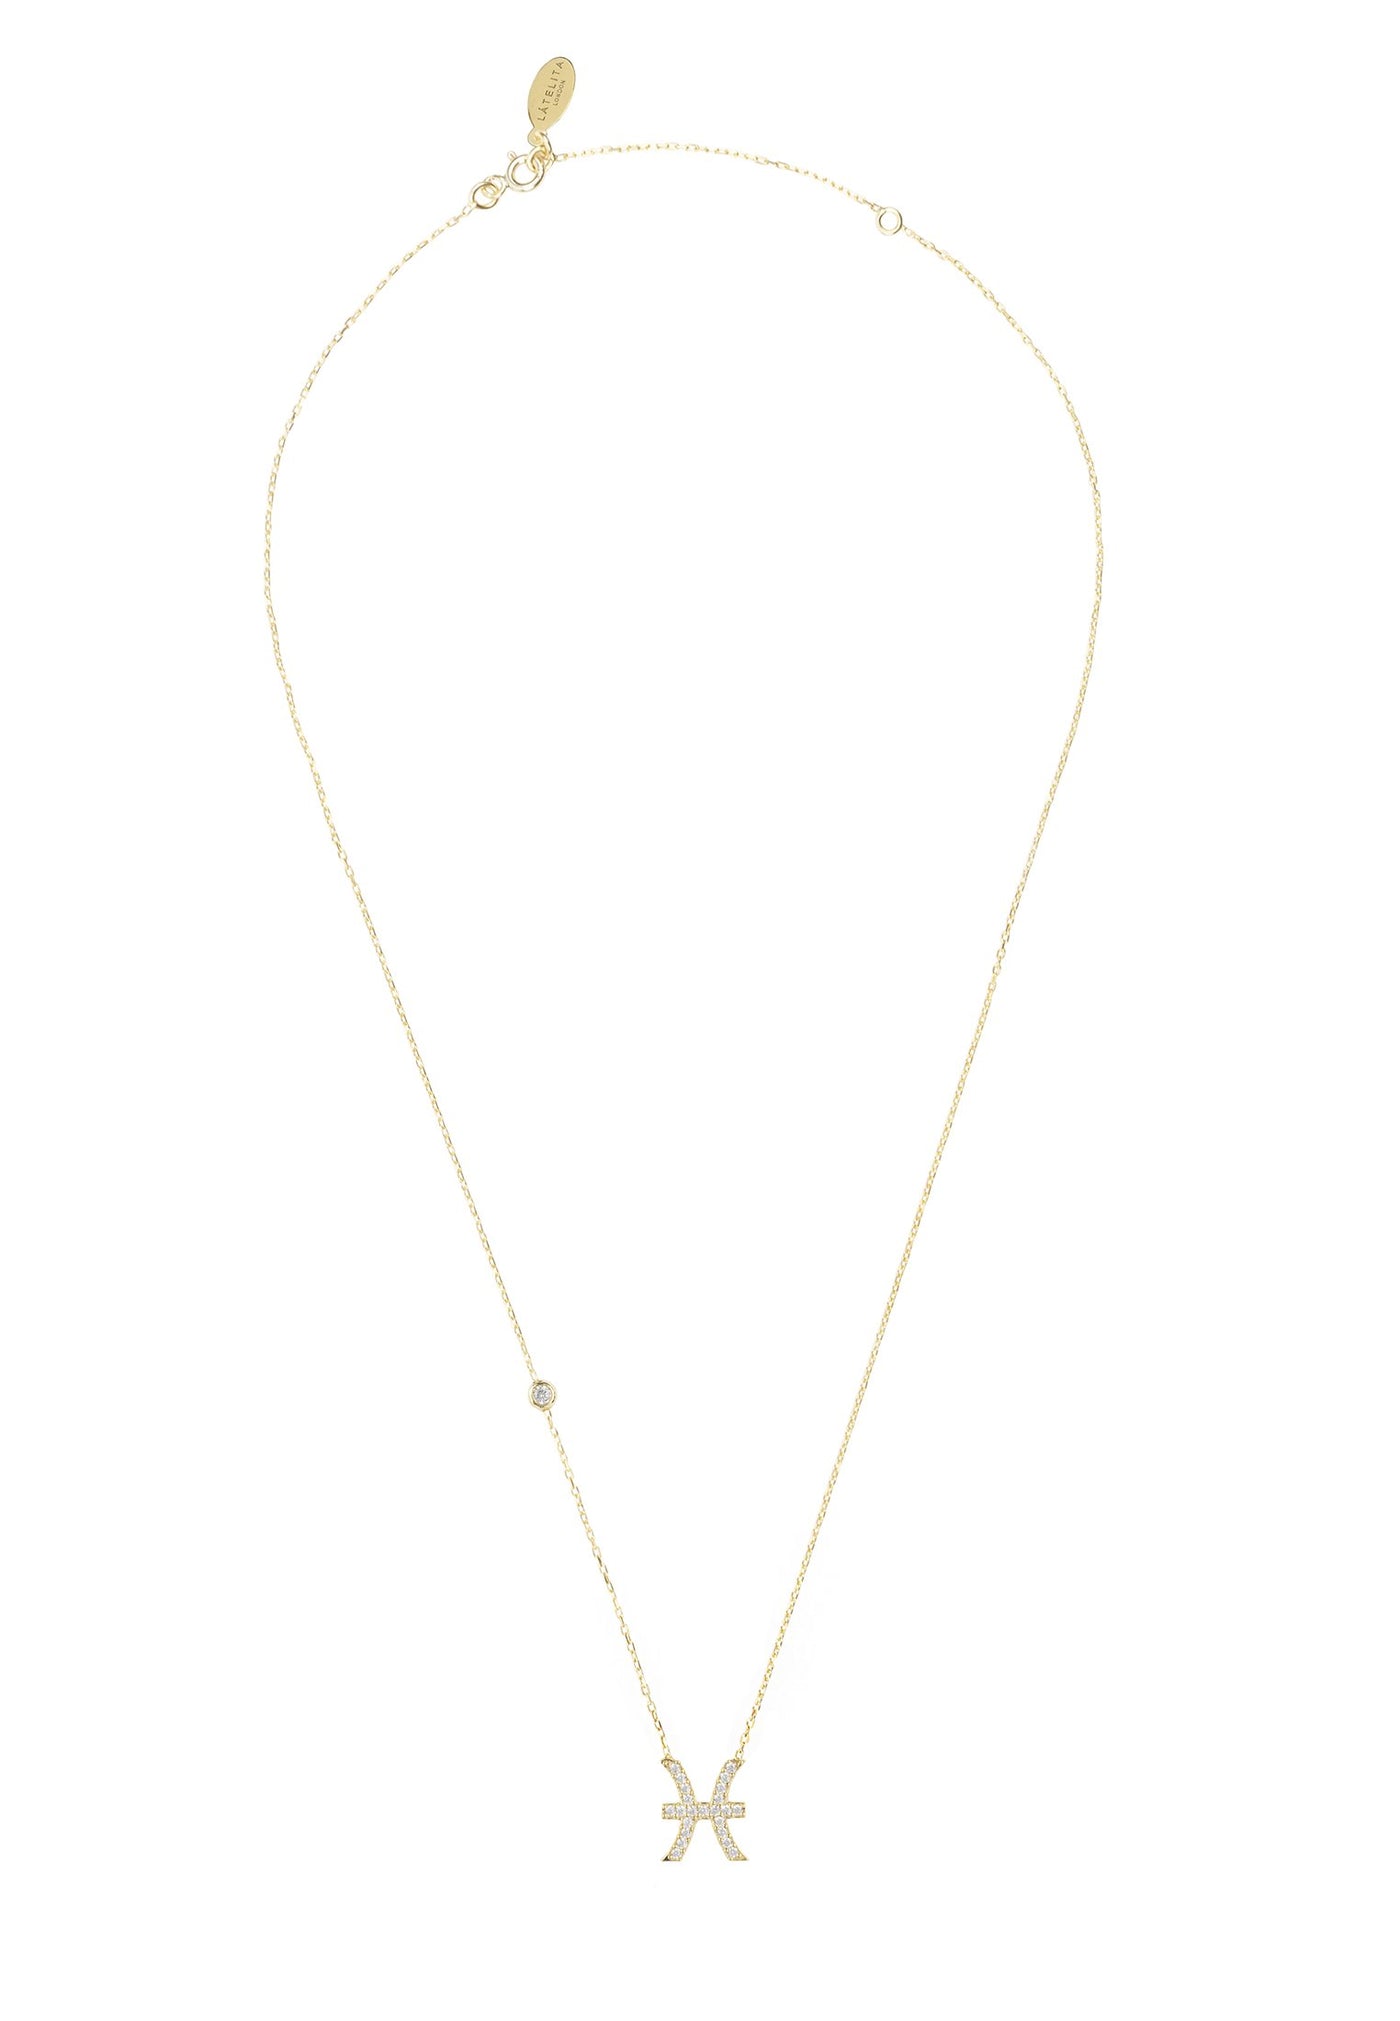 Pisces - Necklace - 22 carat gold plated - Zirconias